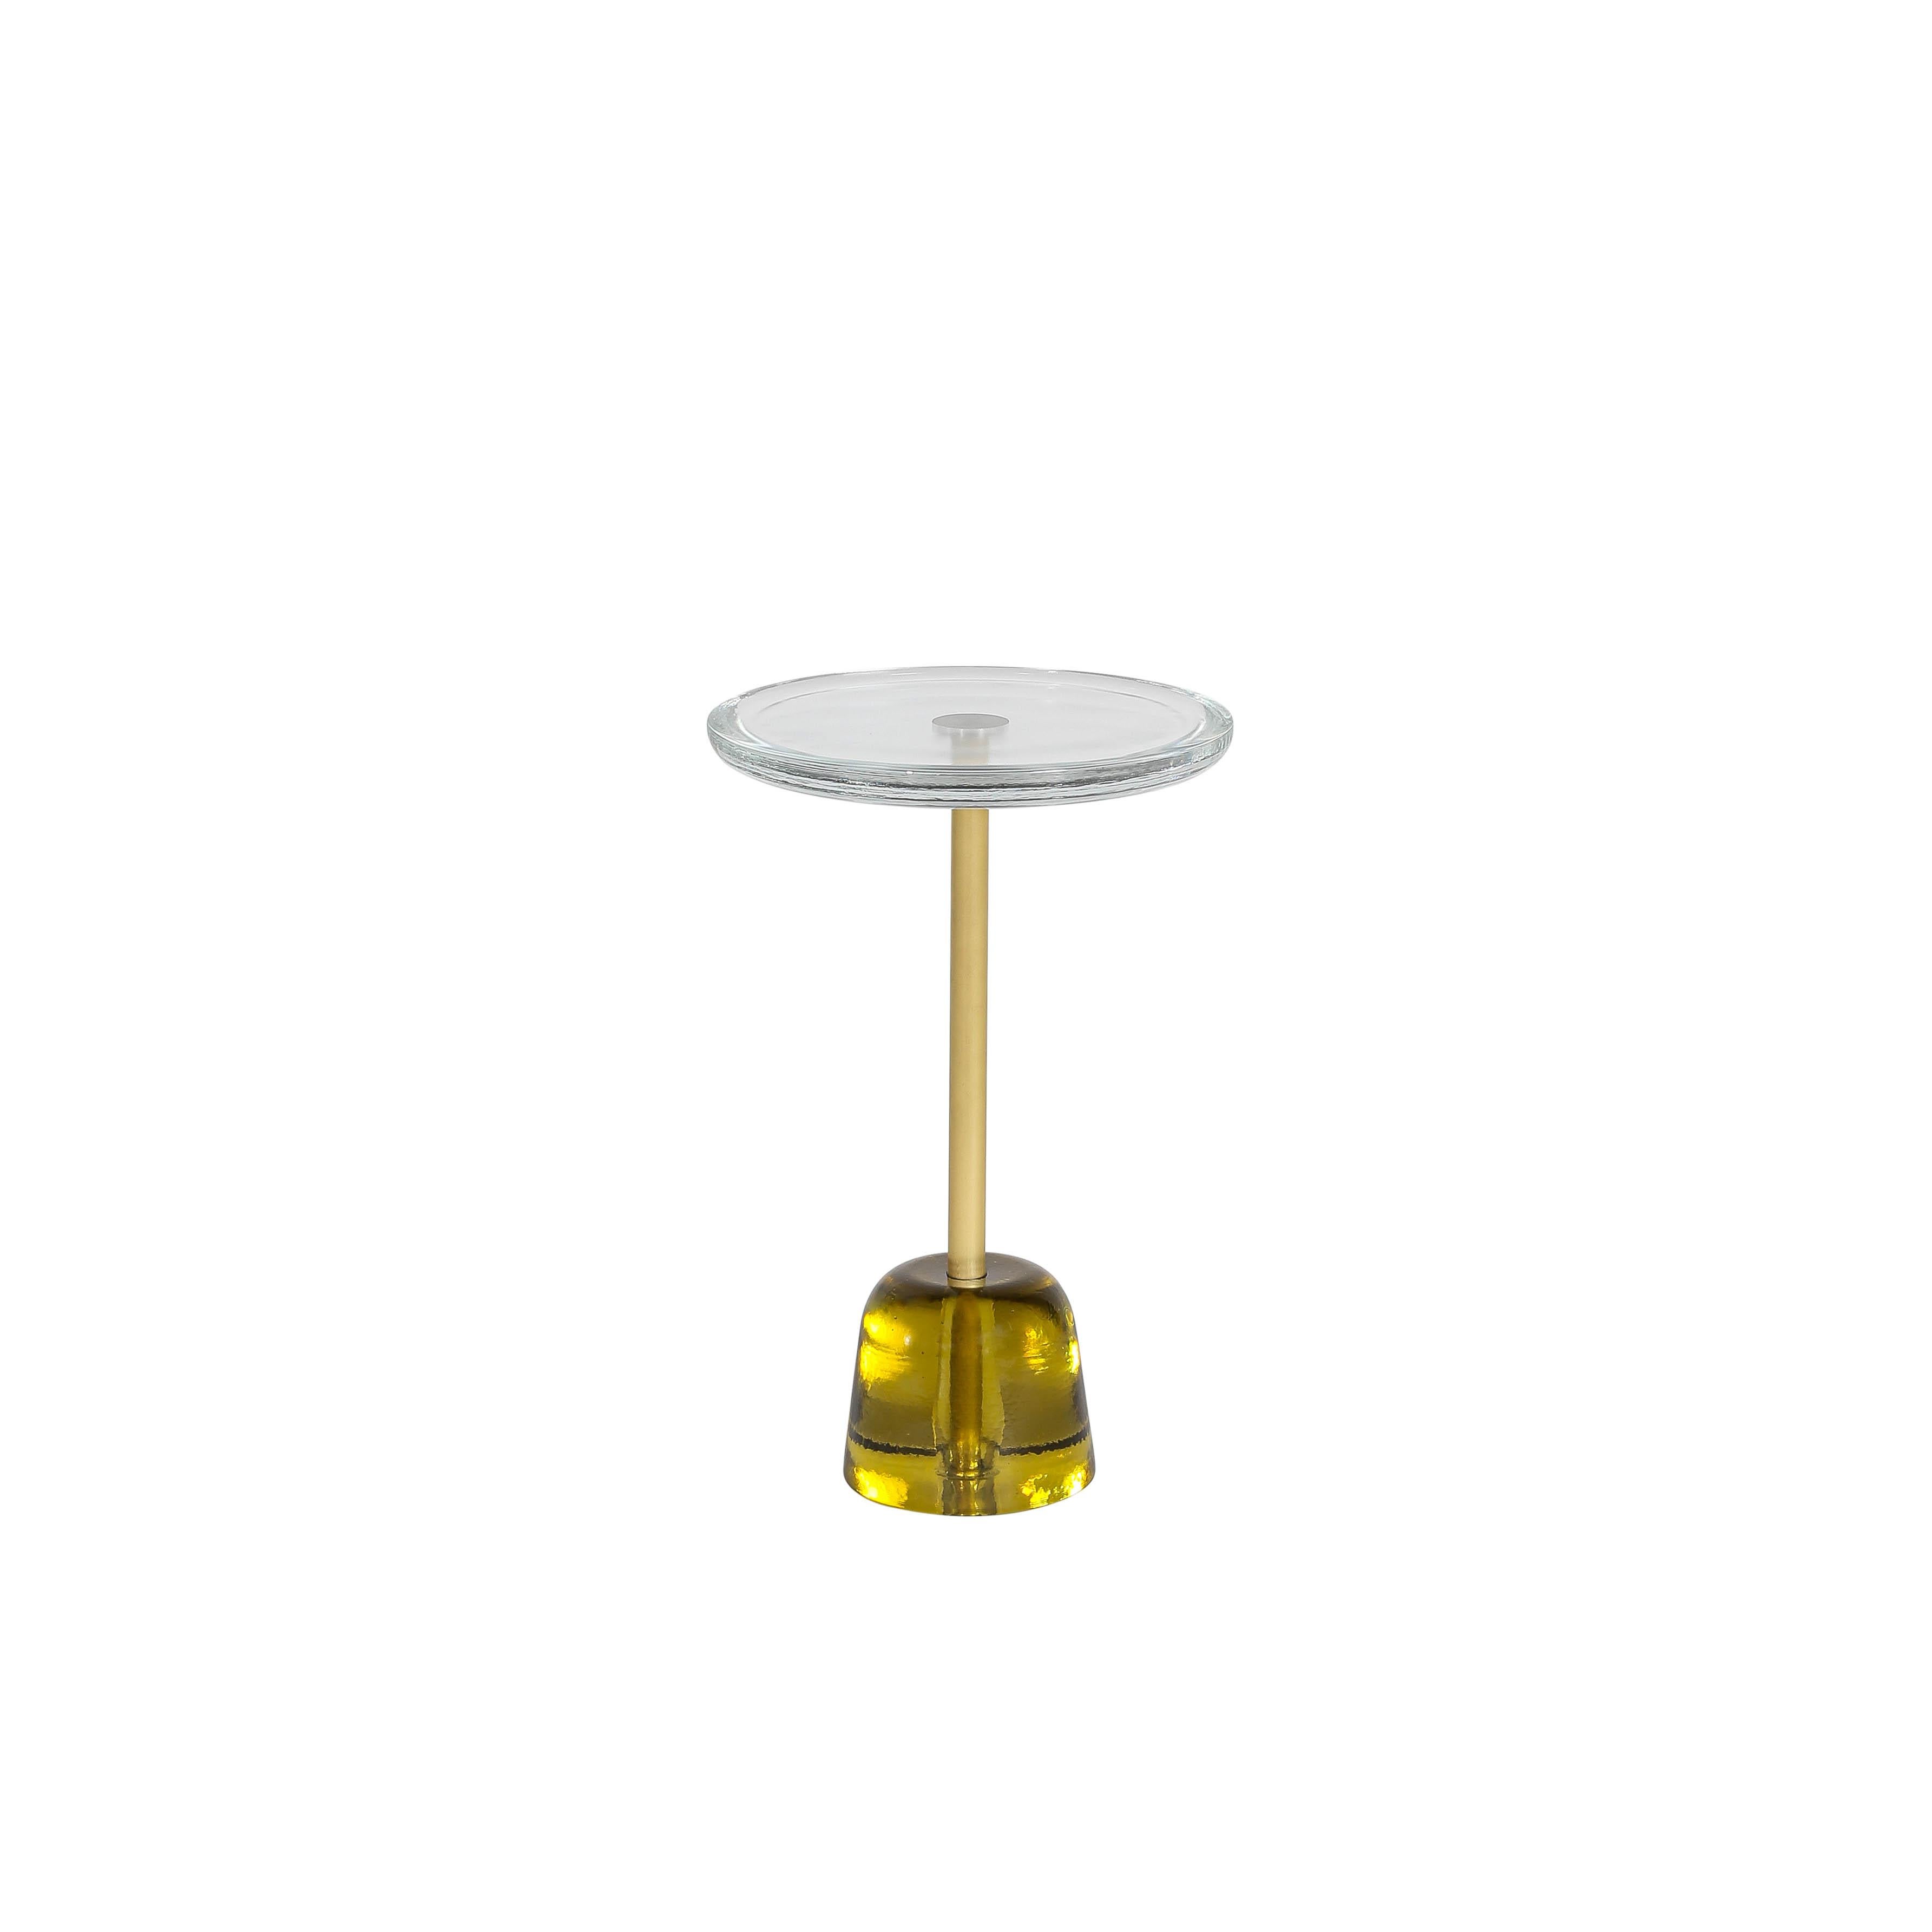 Pina high transparent brass side table by Pulpo
Dimensions: D34 x H52 cm
Materials: glass; brass and steel

Also available in different colours.

Sebastian Herkner’s distinctively tall, skinny side table series pina is inspired by the abstract